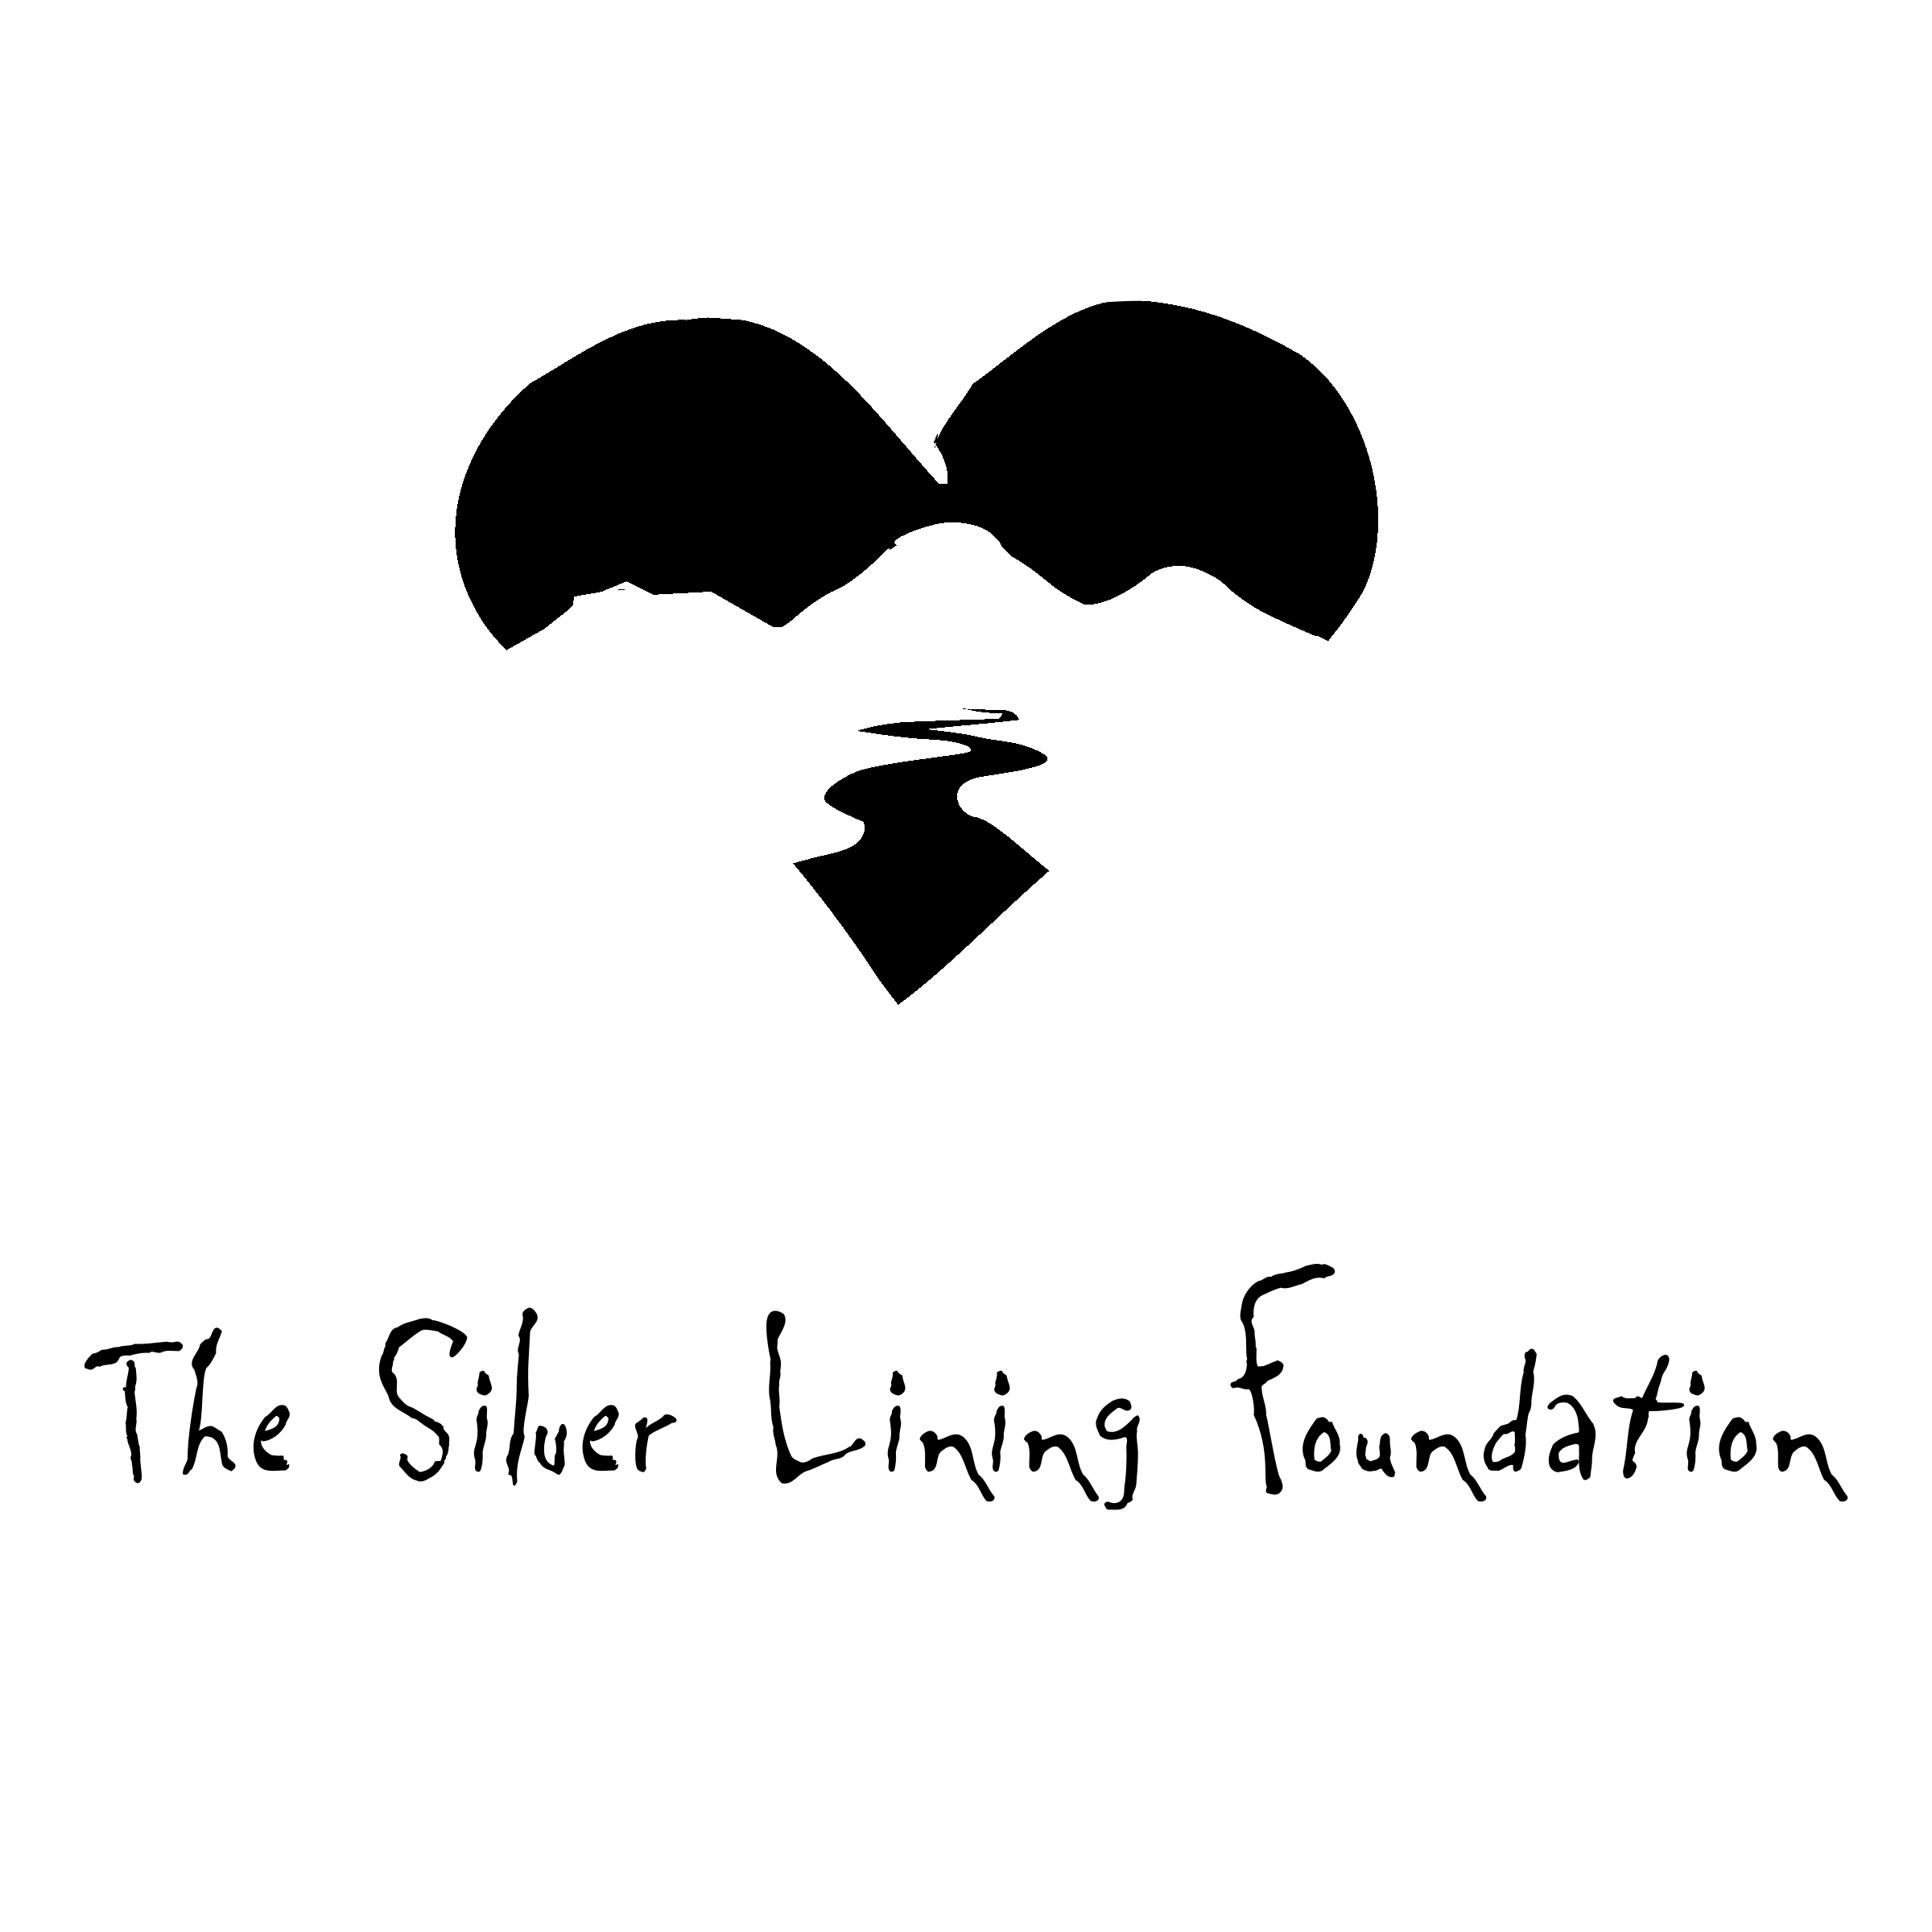 Lining Logo - The Silver Lining Foundation Logo PNG Transparent & SVG Vector ...